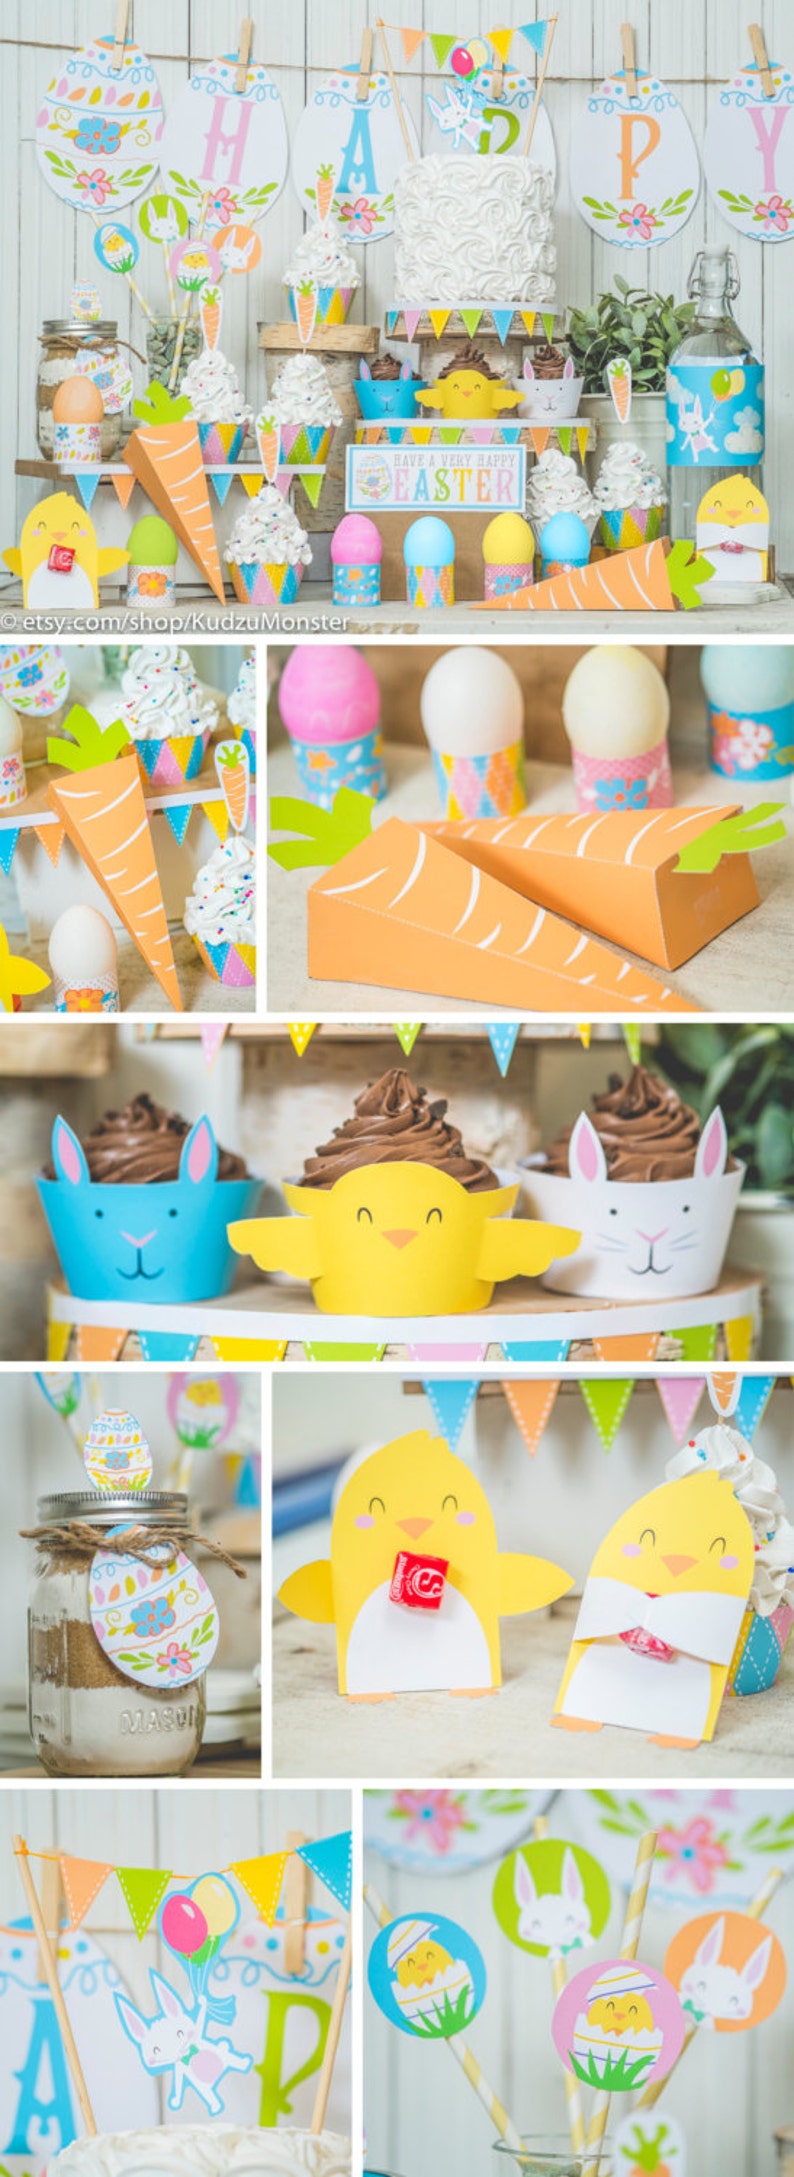 Easter printable decor kit easter bunny carrot favor boxes baby chicks eggs holder cupcake wrappers DIY easter brunch party instant download image 1